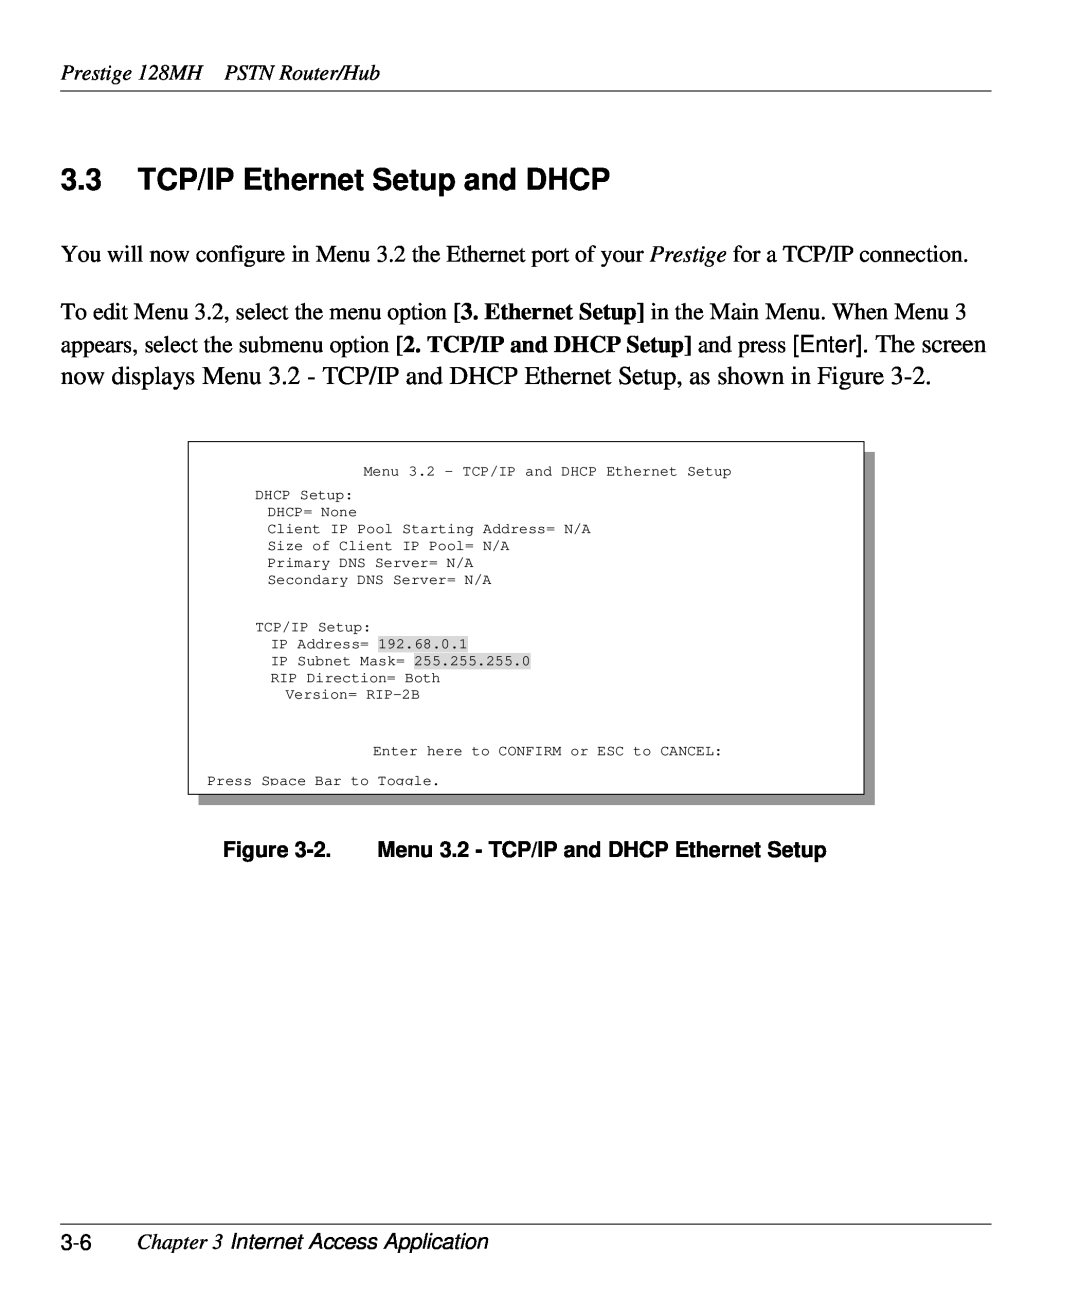 ZyXEL Communications 128MH user manual 3.3 TCP/IP Ethernet Setup and DHCP, 2. Menu 3.2 - TCP/IP and DHCP Ethernet Setup 